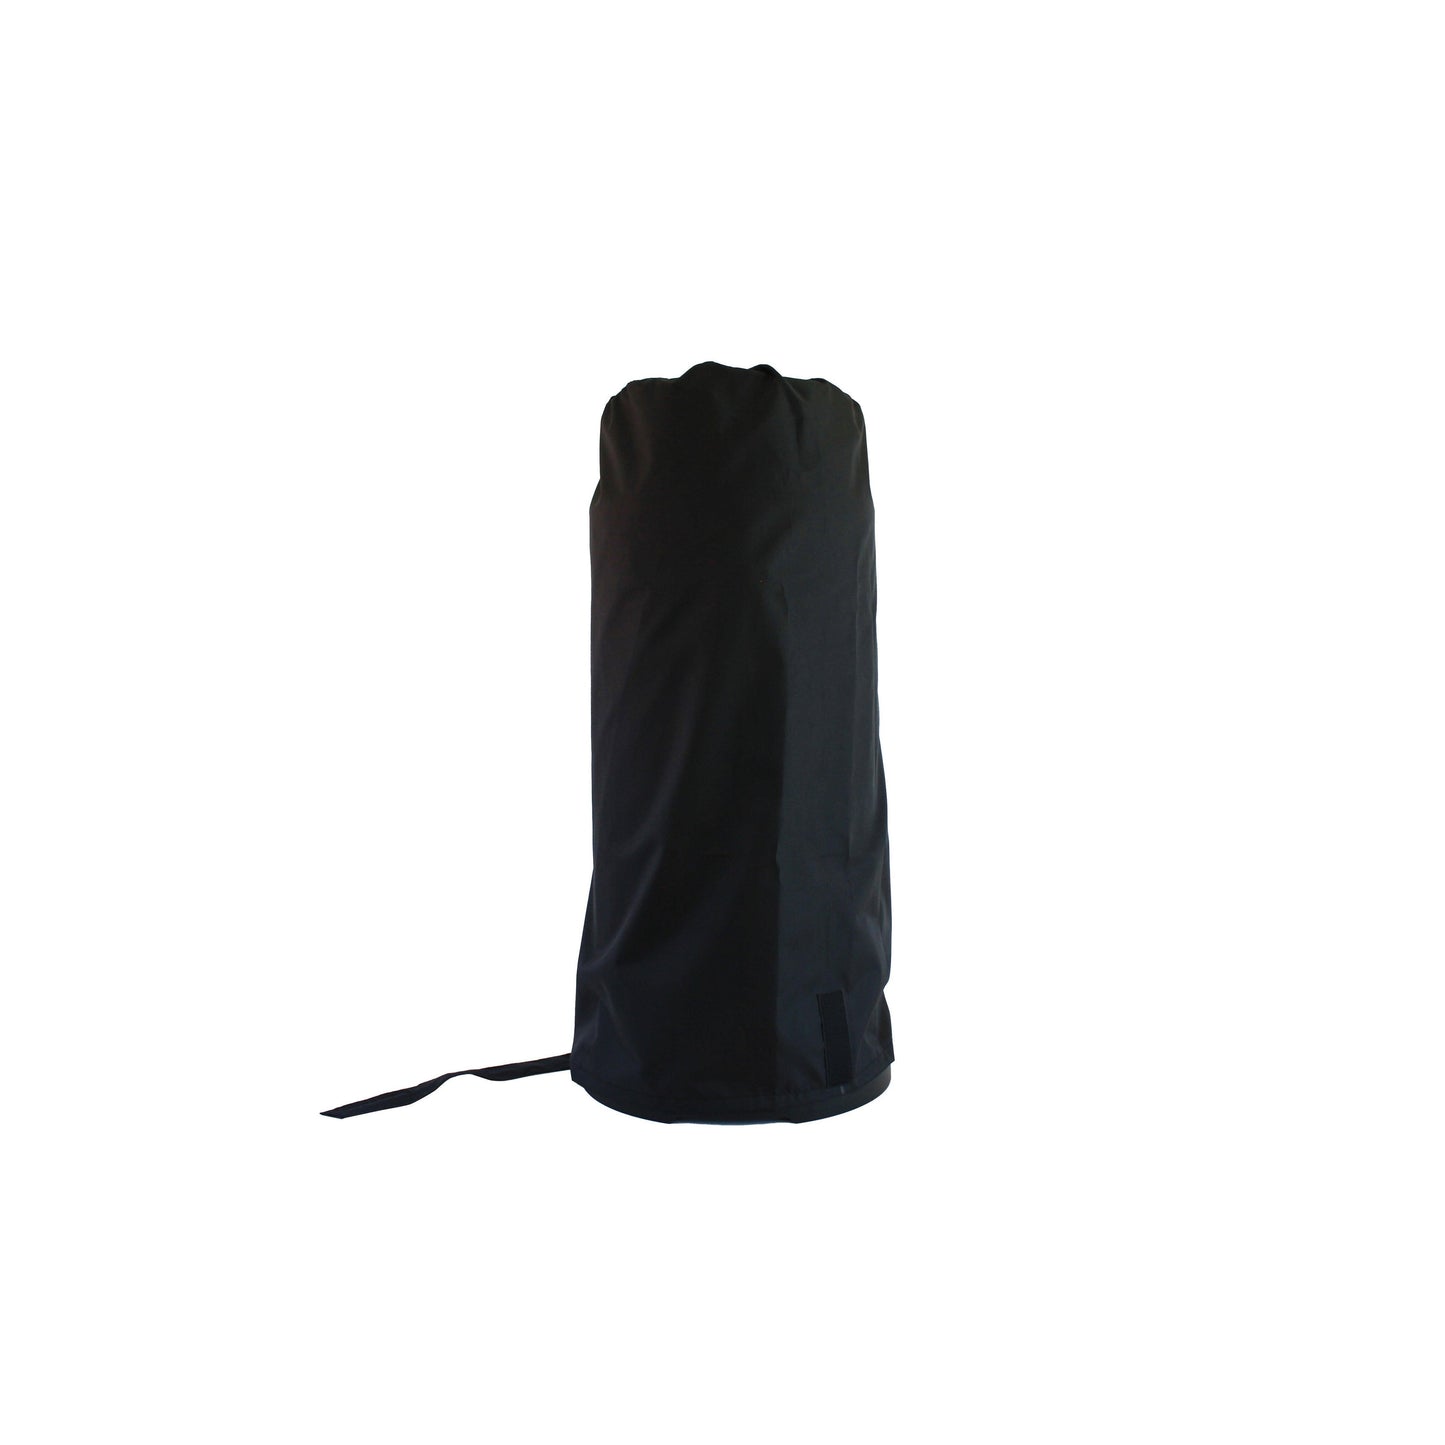 DUST COVER FOR GHP38 SHORTSTAND FIREPIT PATIO HEATER